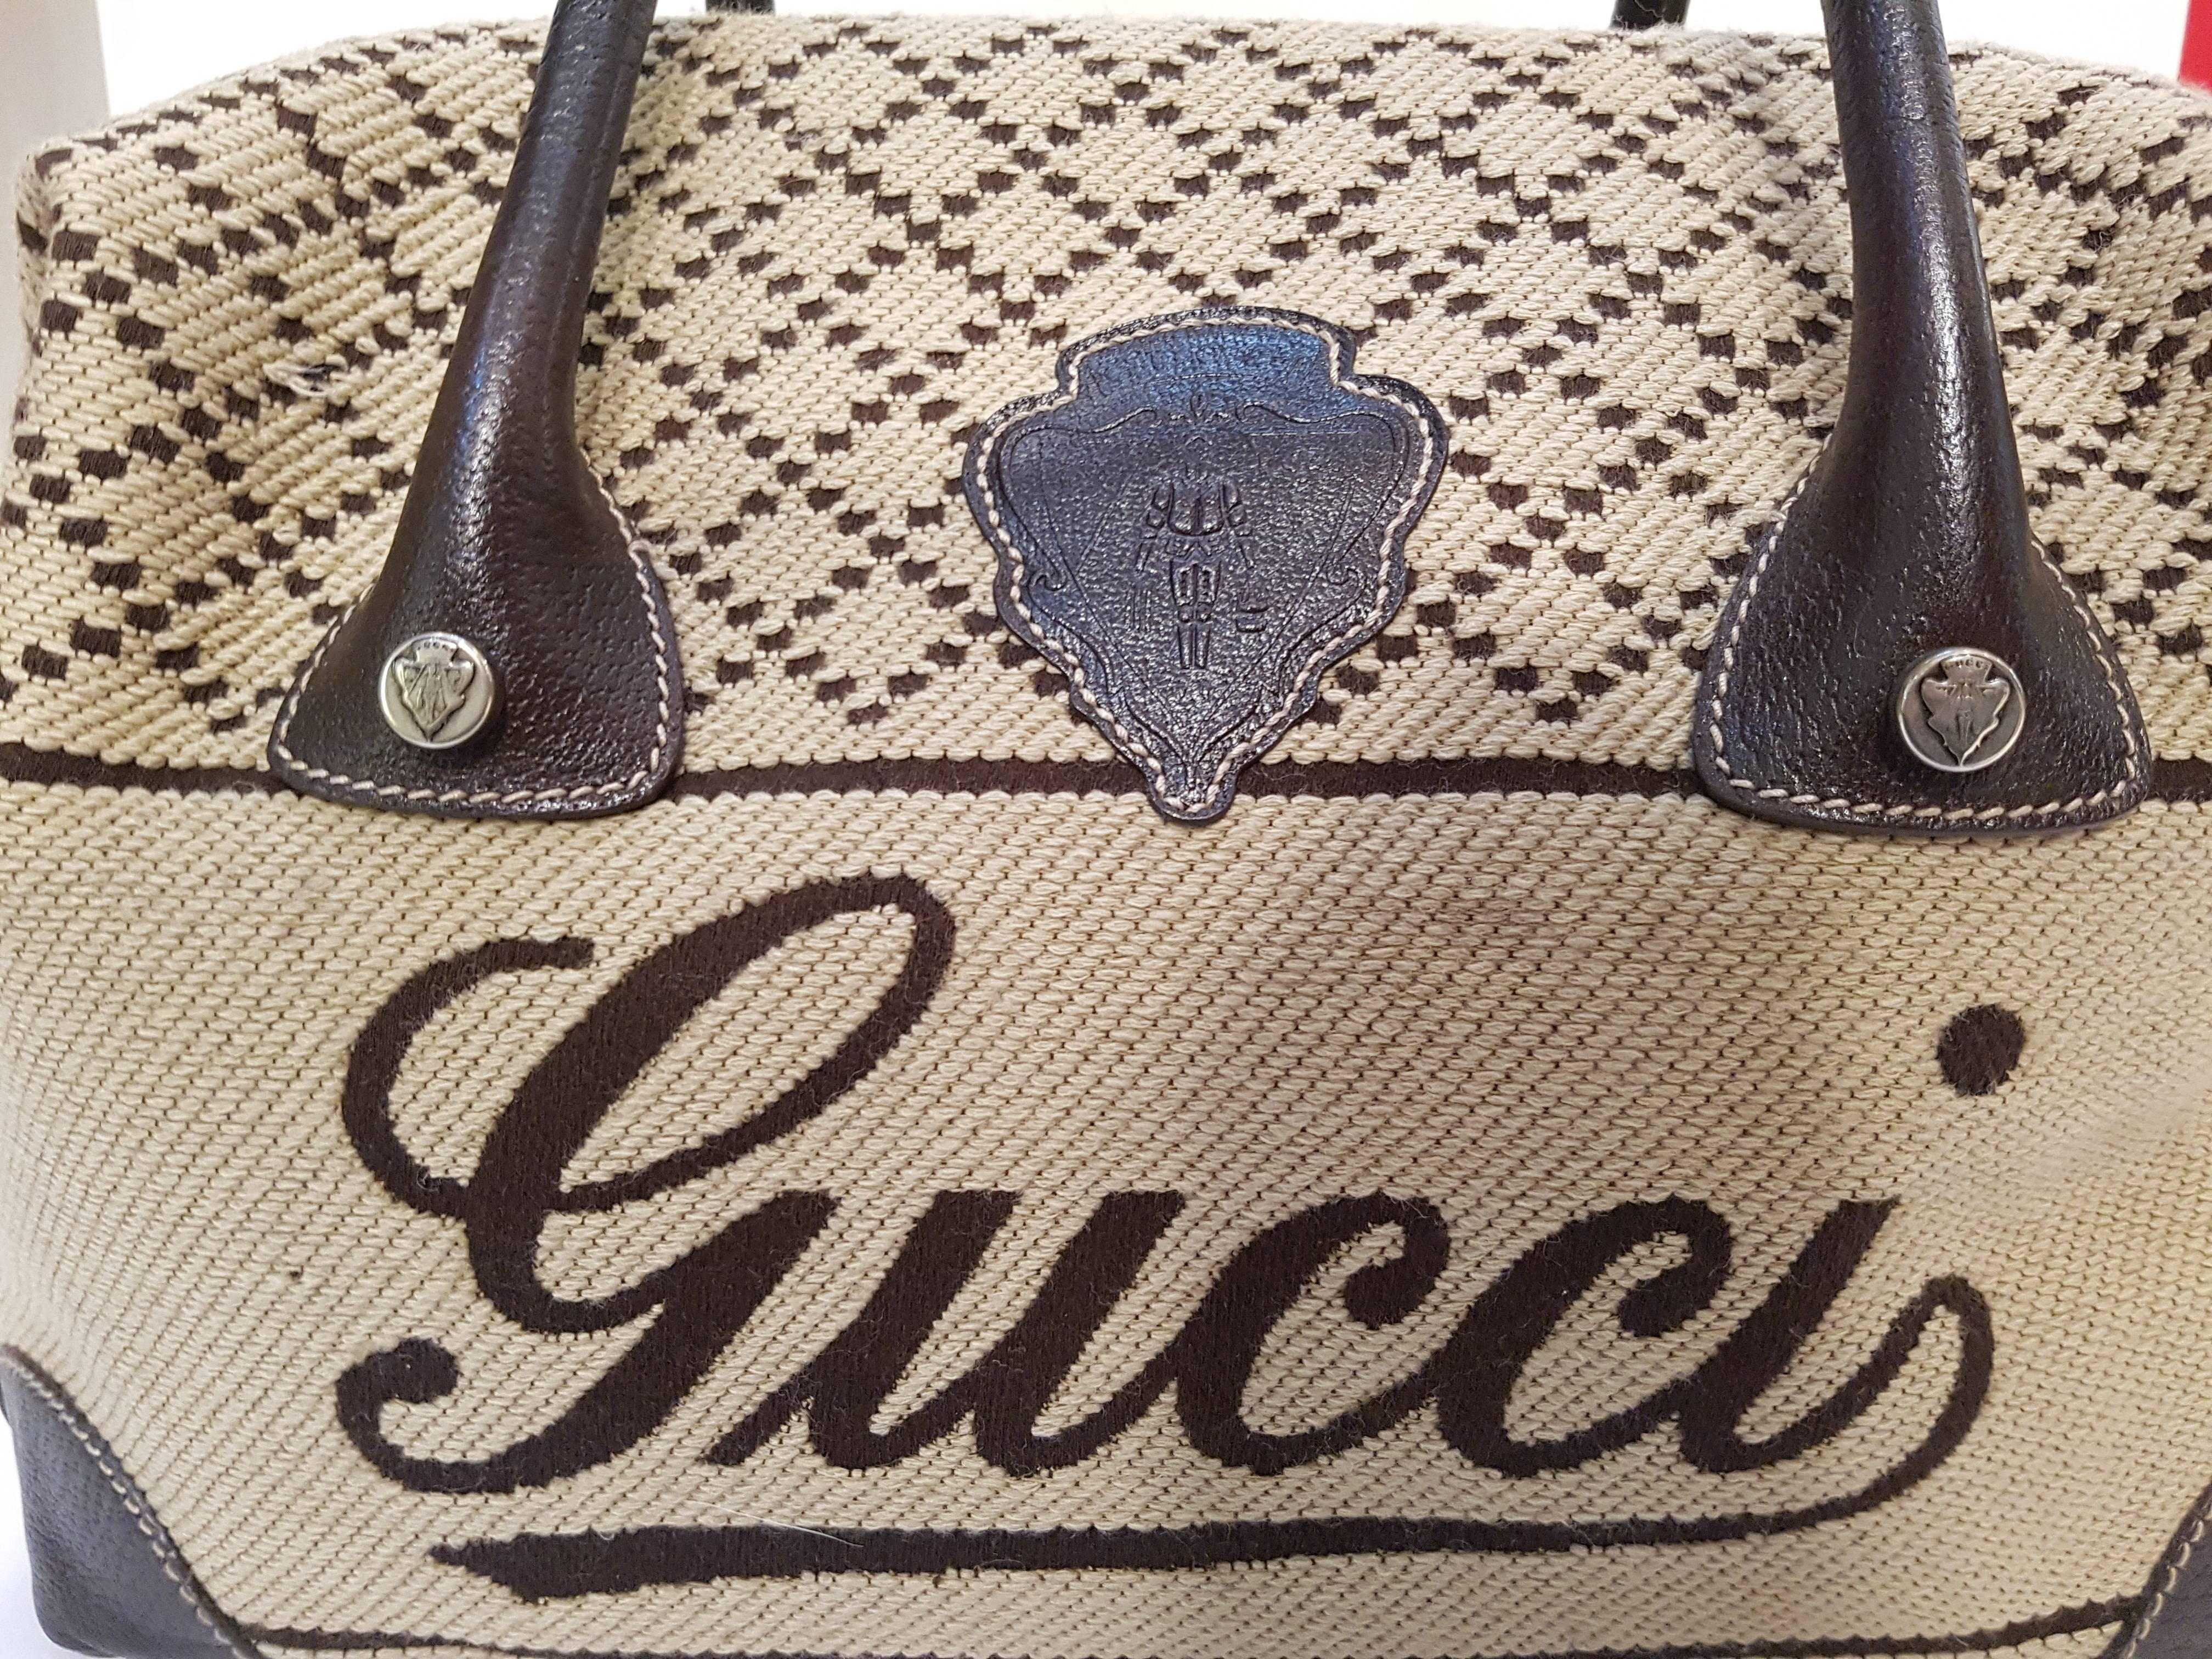 Gucci Brown Wool knit bag
brown logo and brown leather
silver tone hardware